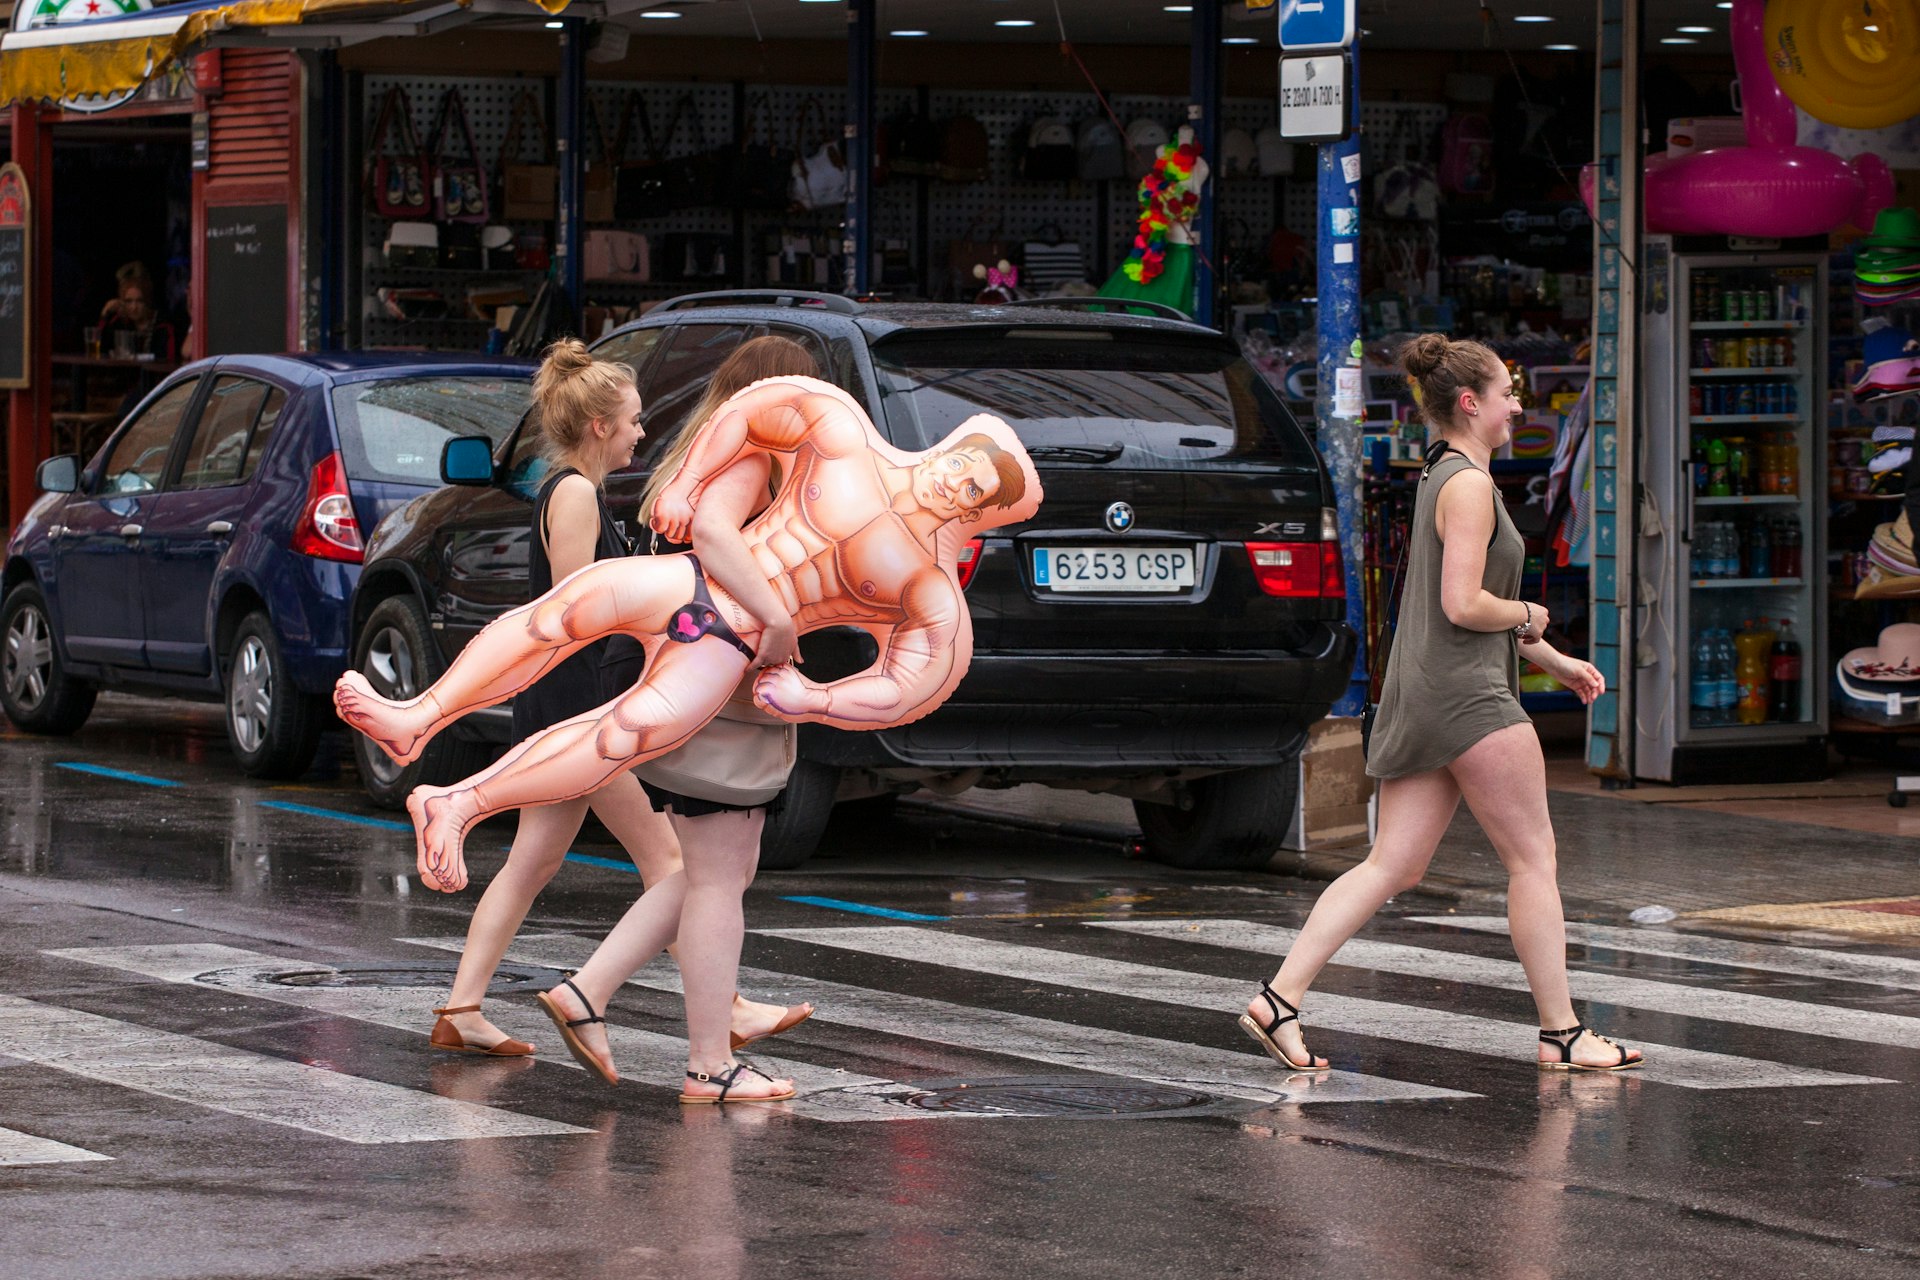 Women carry an inflatable doll on the streets of Benidorm, Valencia, Spain